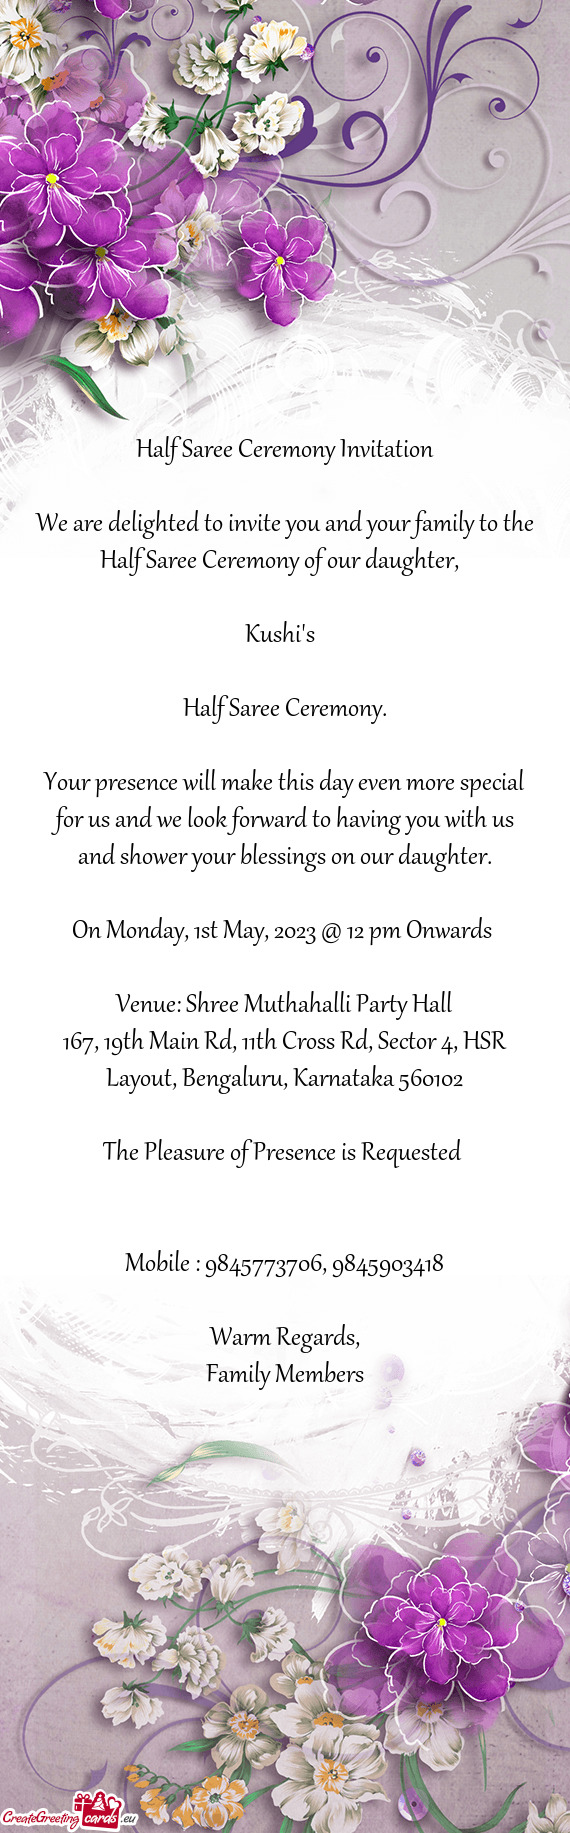 We are delighted to invite you and your family to the Half Saree Ceremony of our daughter